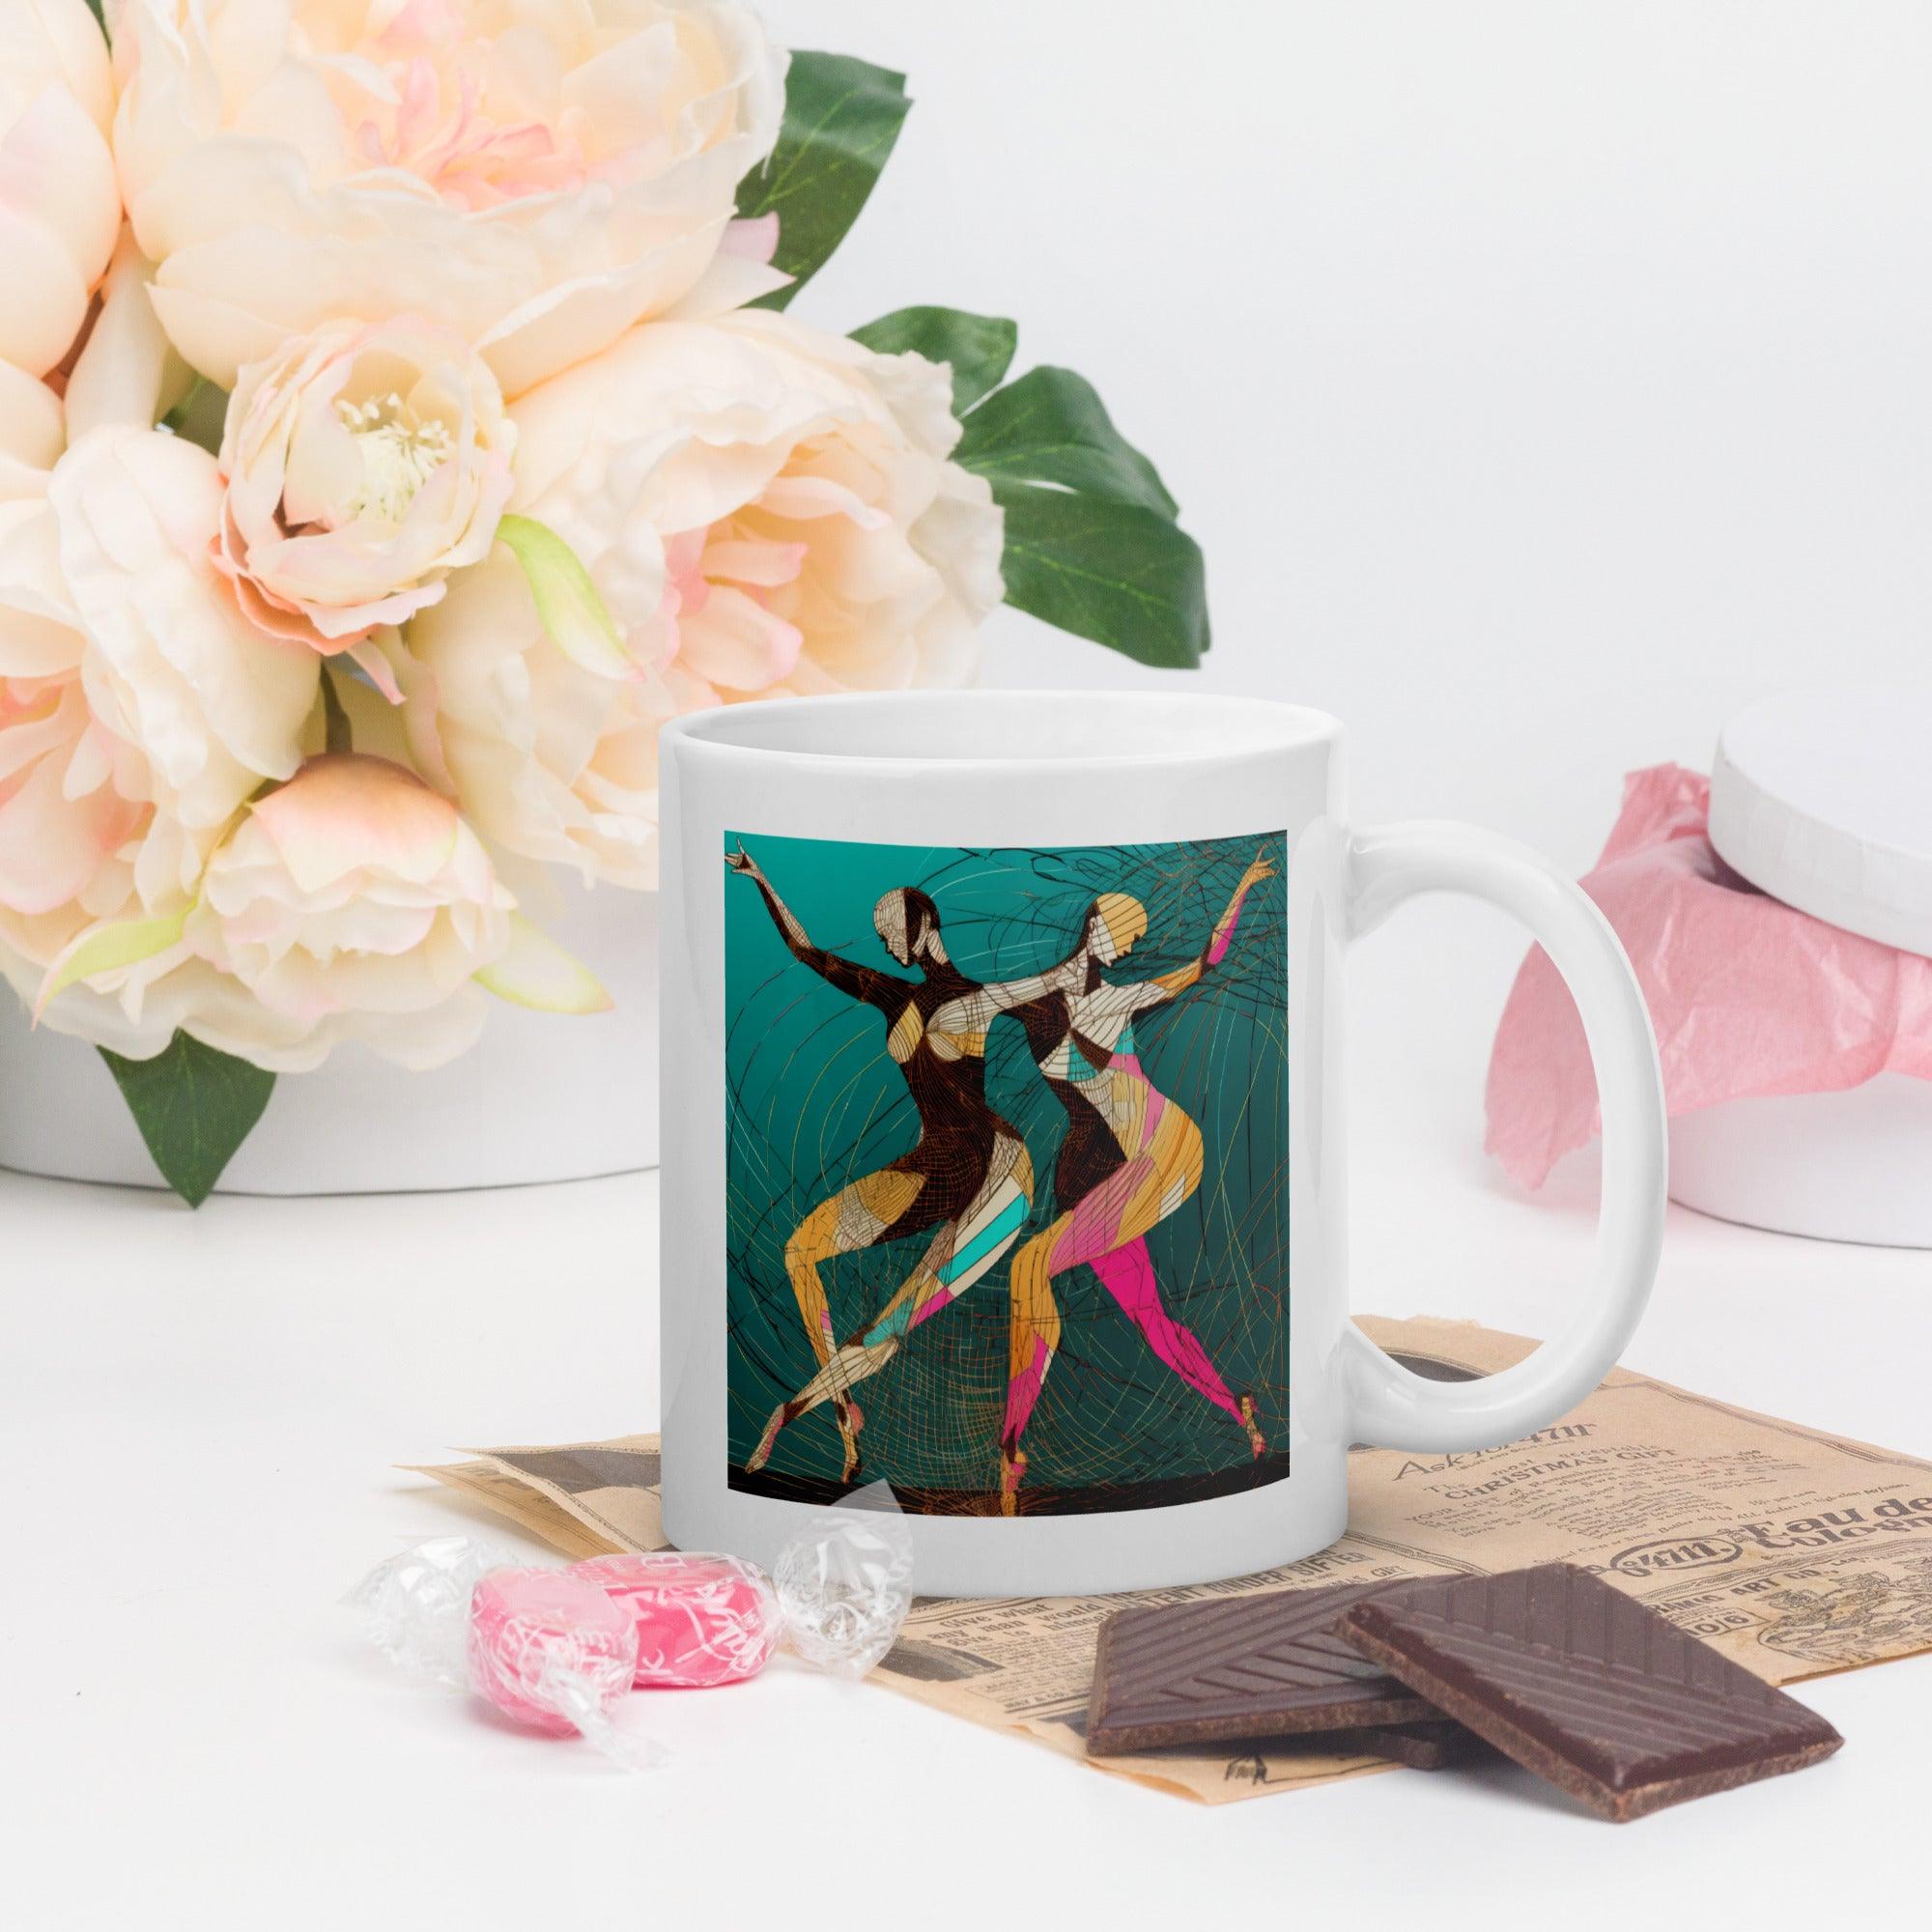 White glossy mug for dance performance on a table.